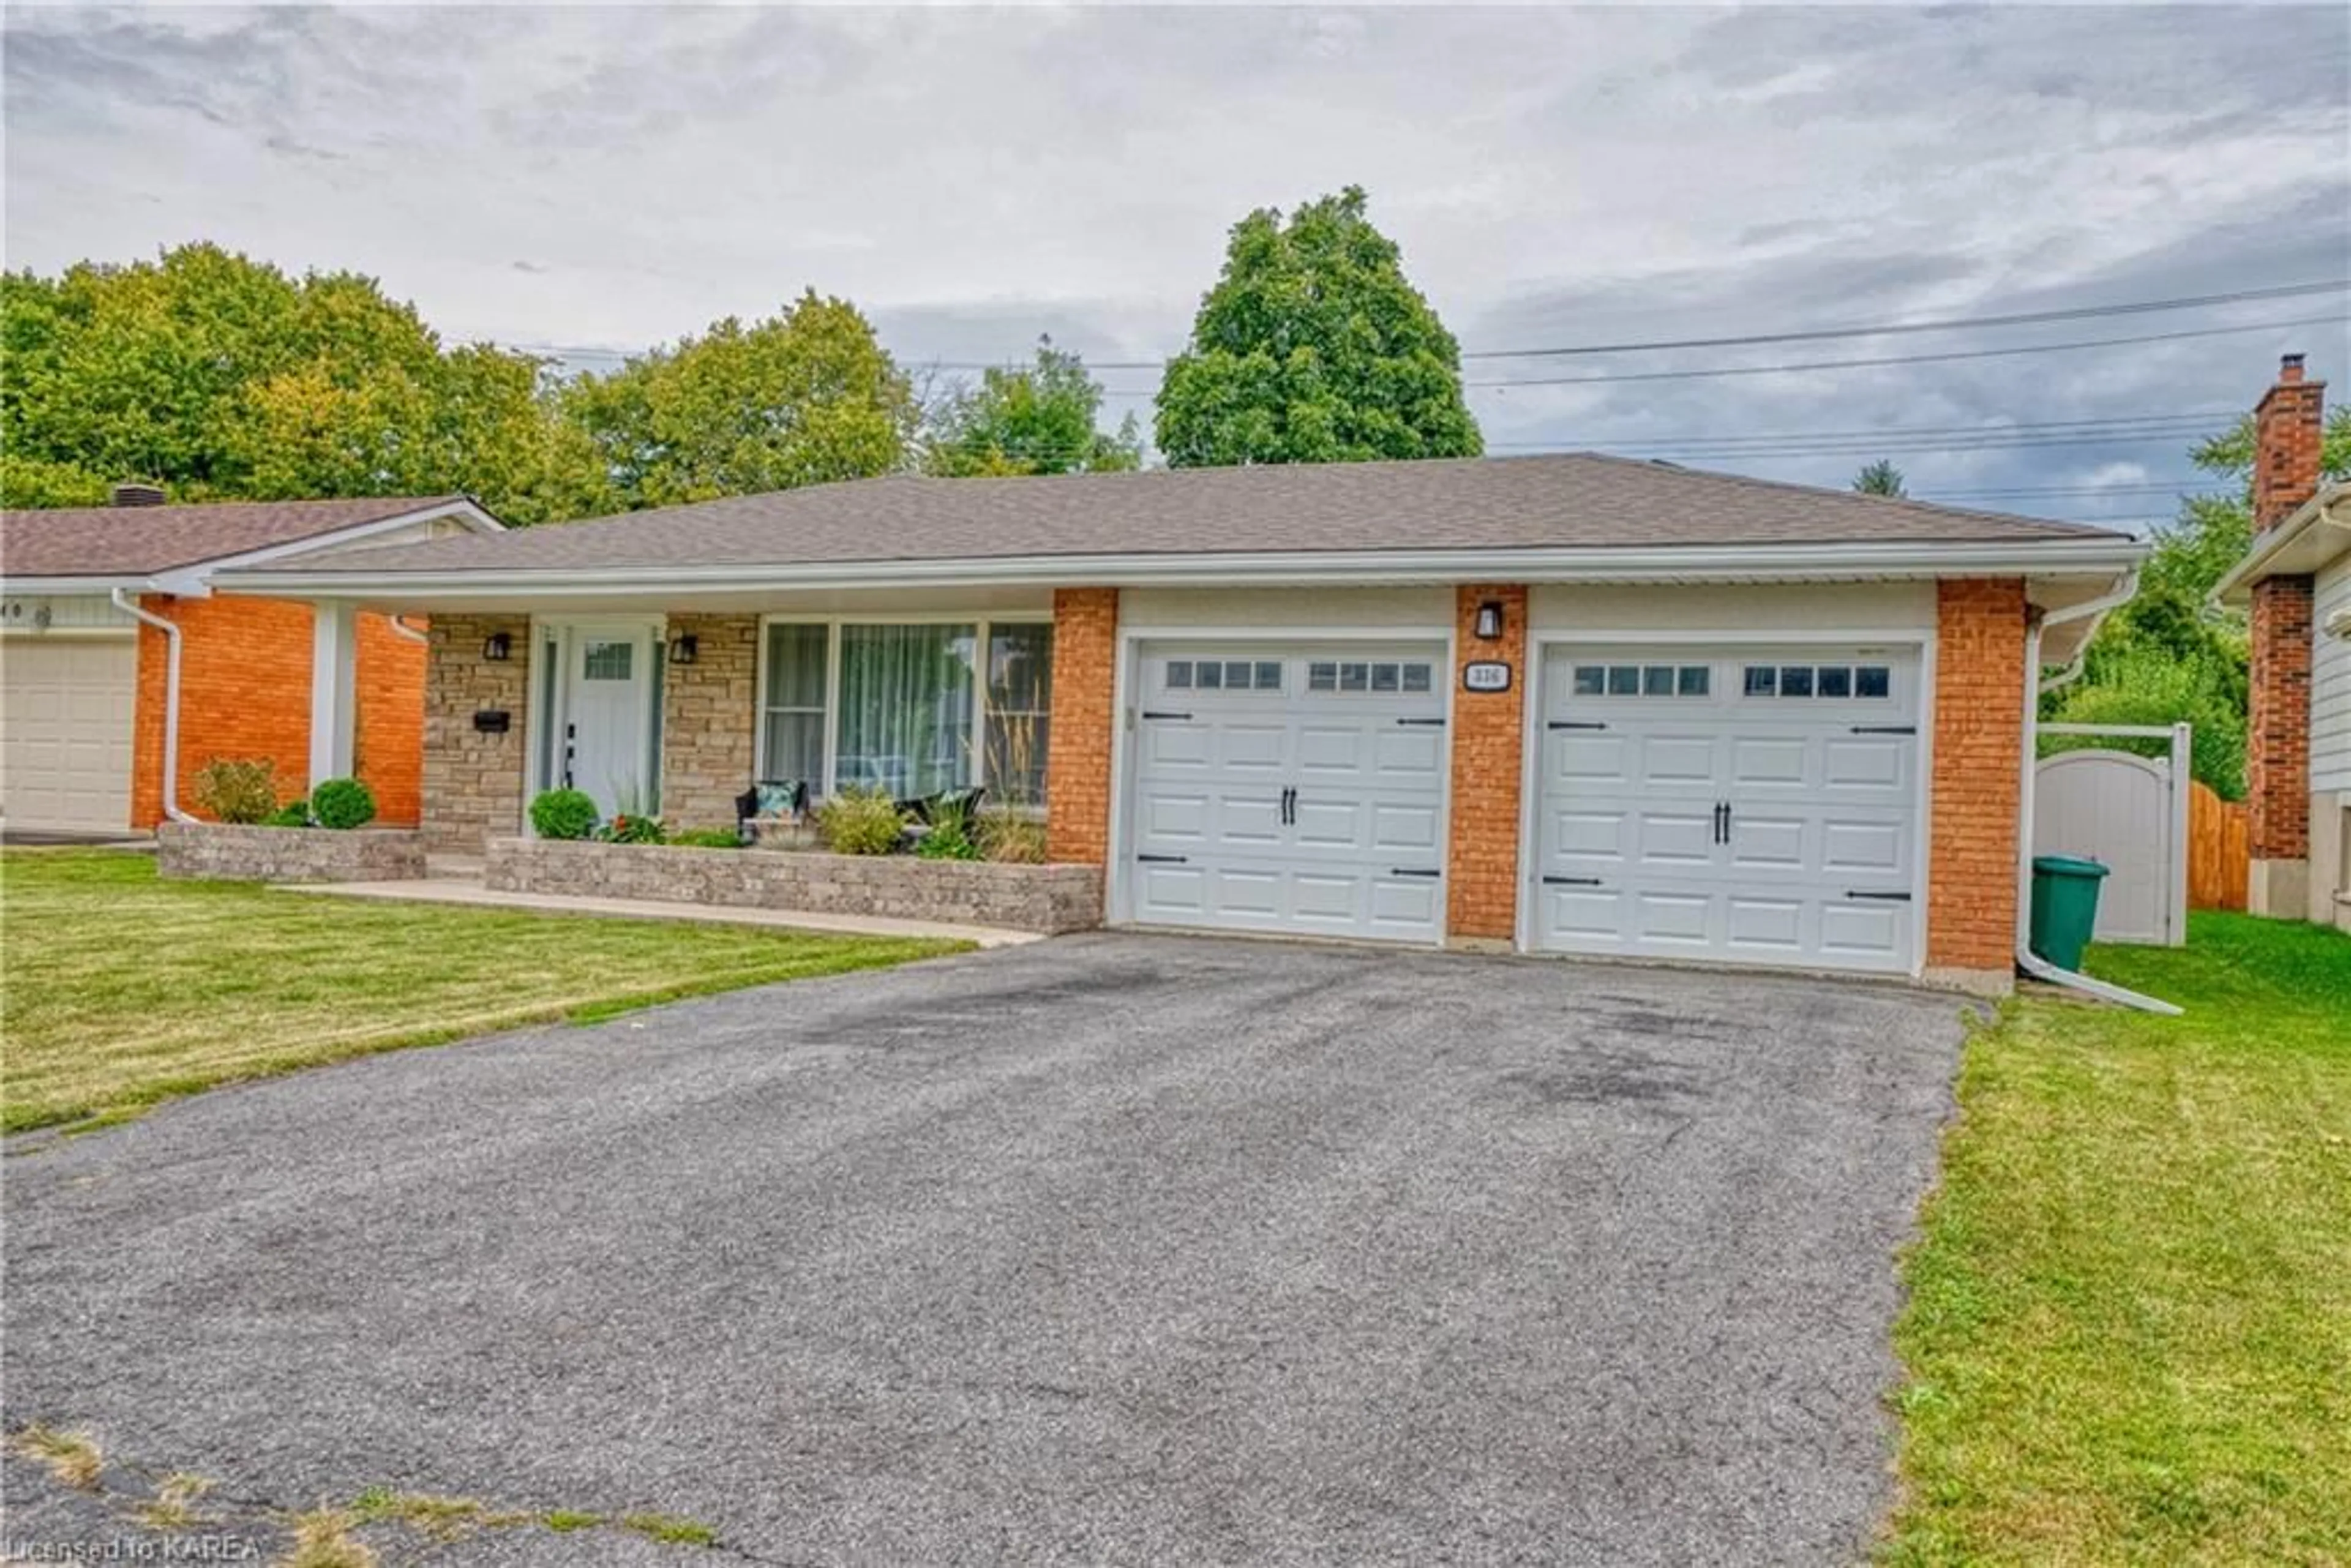 Home with brick exterior material for 336 Renda St, Kingston Ontario K7M 5X8